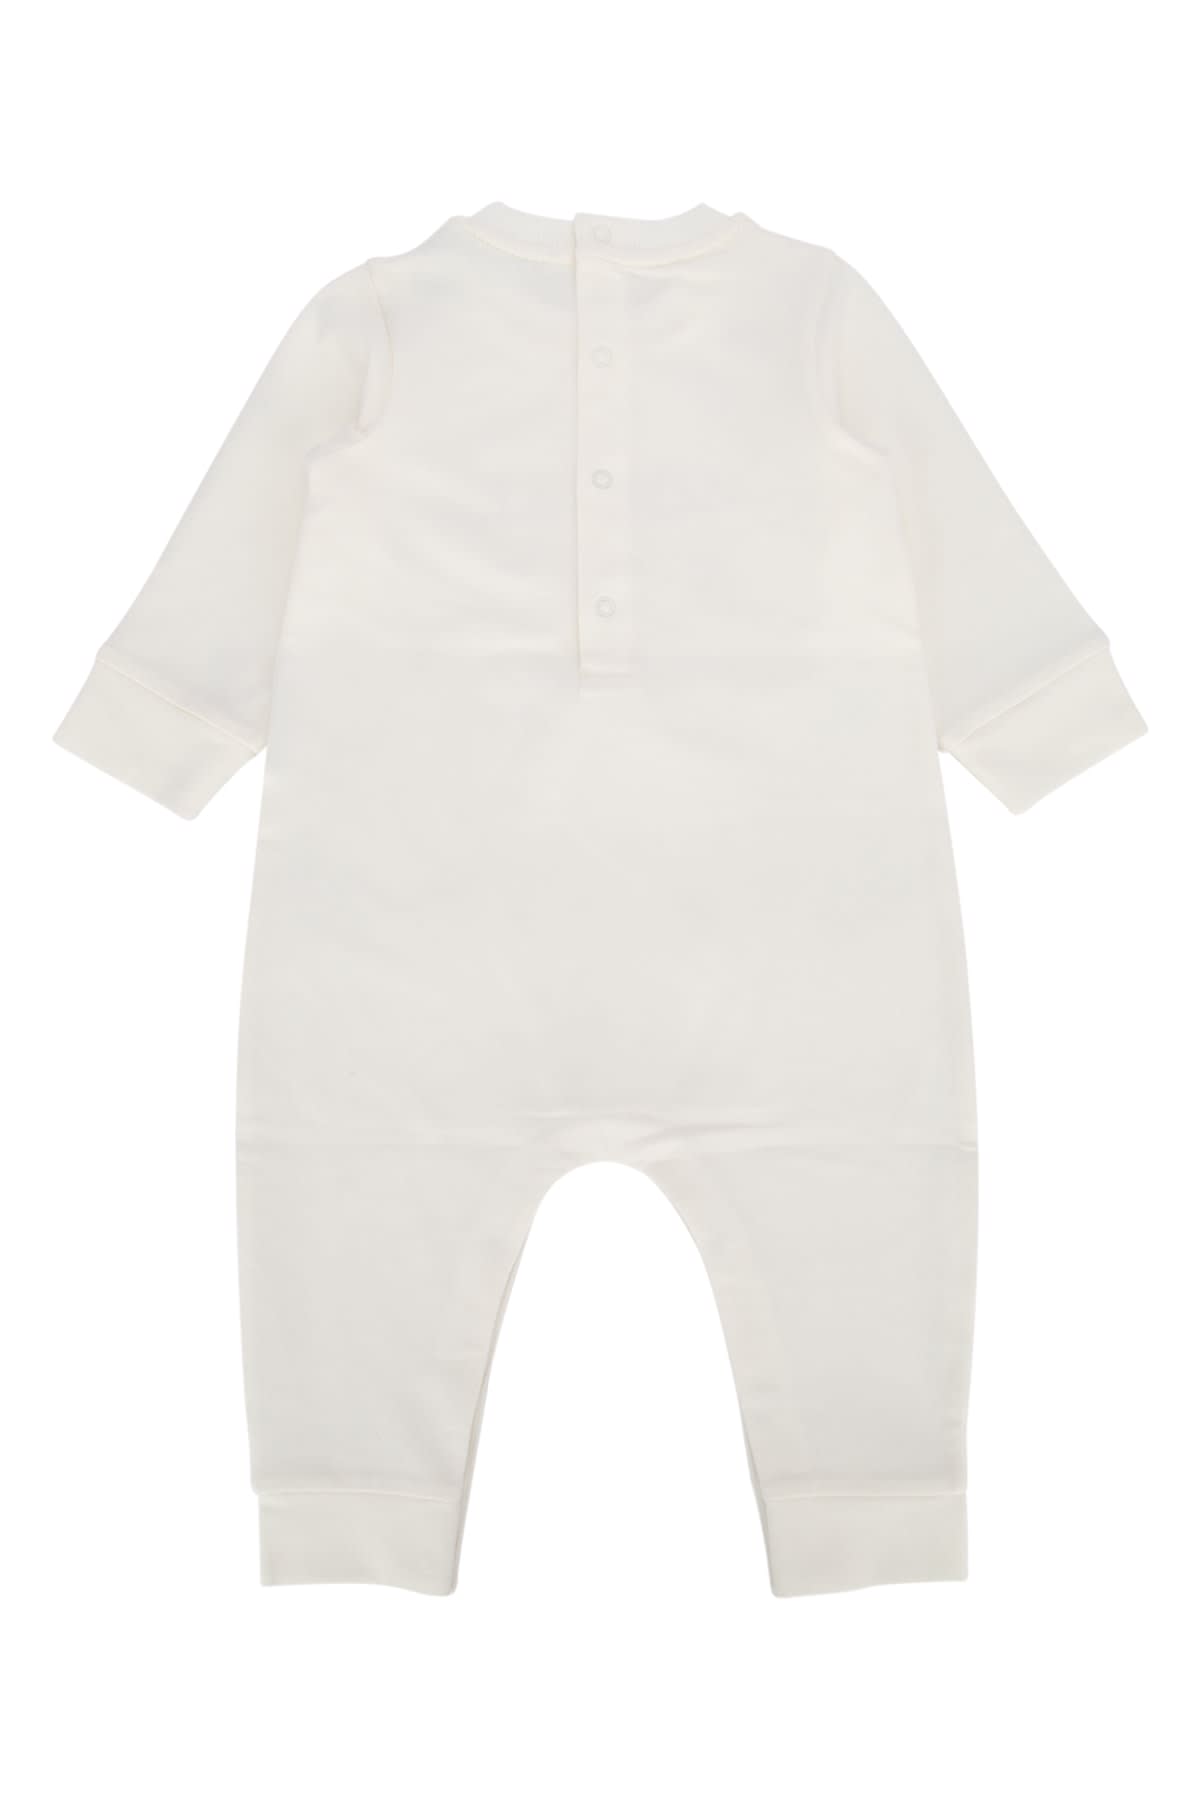 Moncler Babies' Maglione In 034